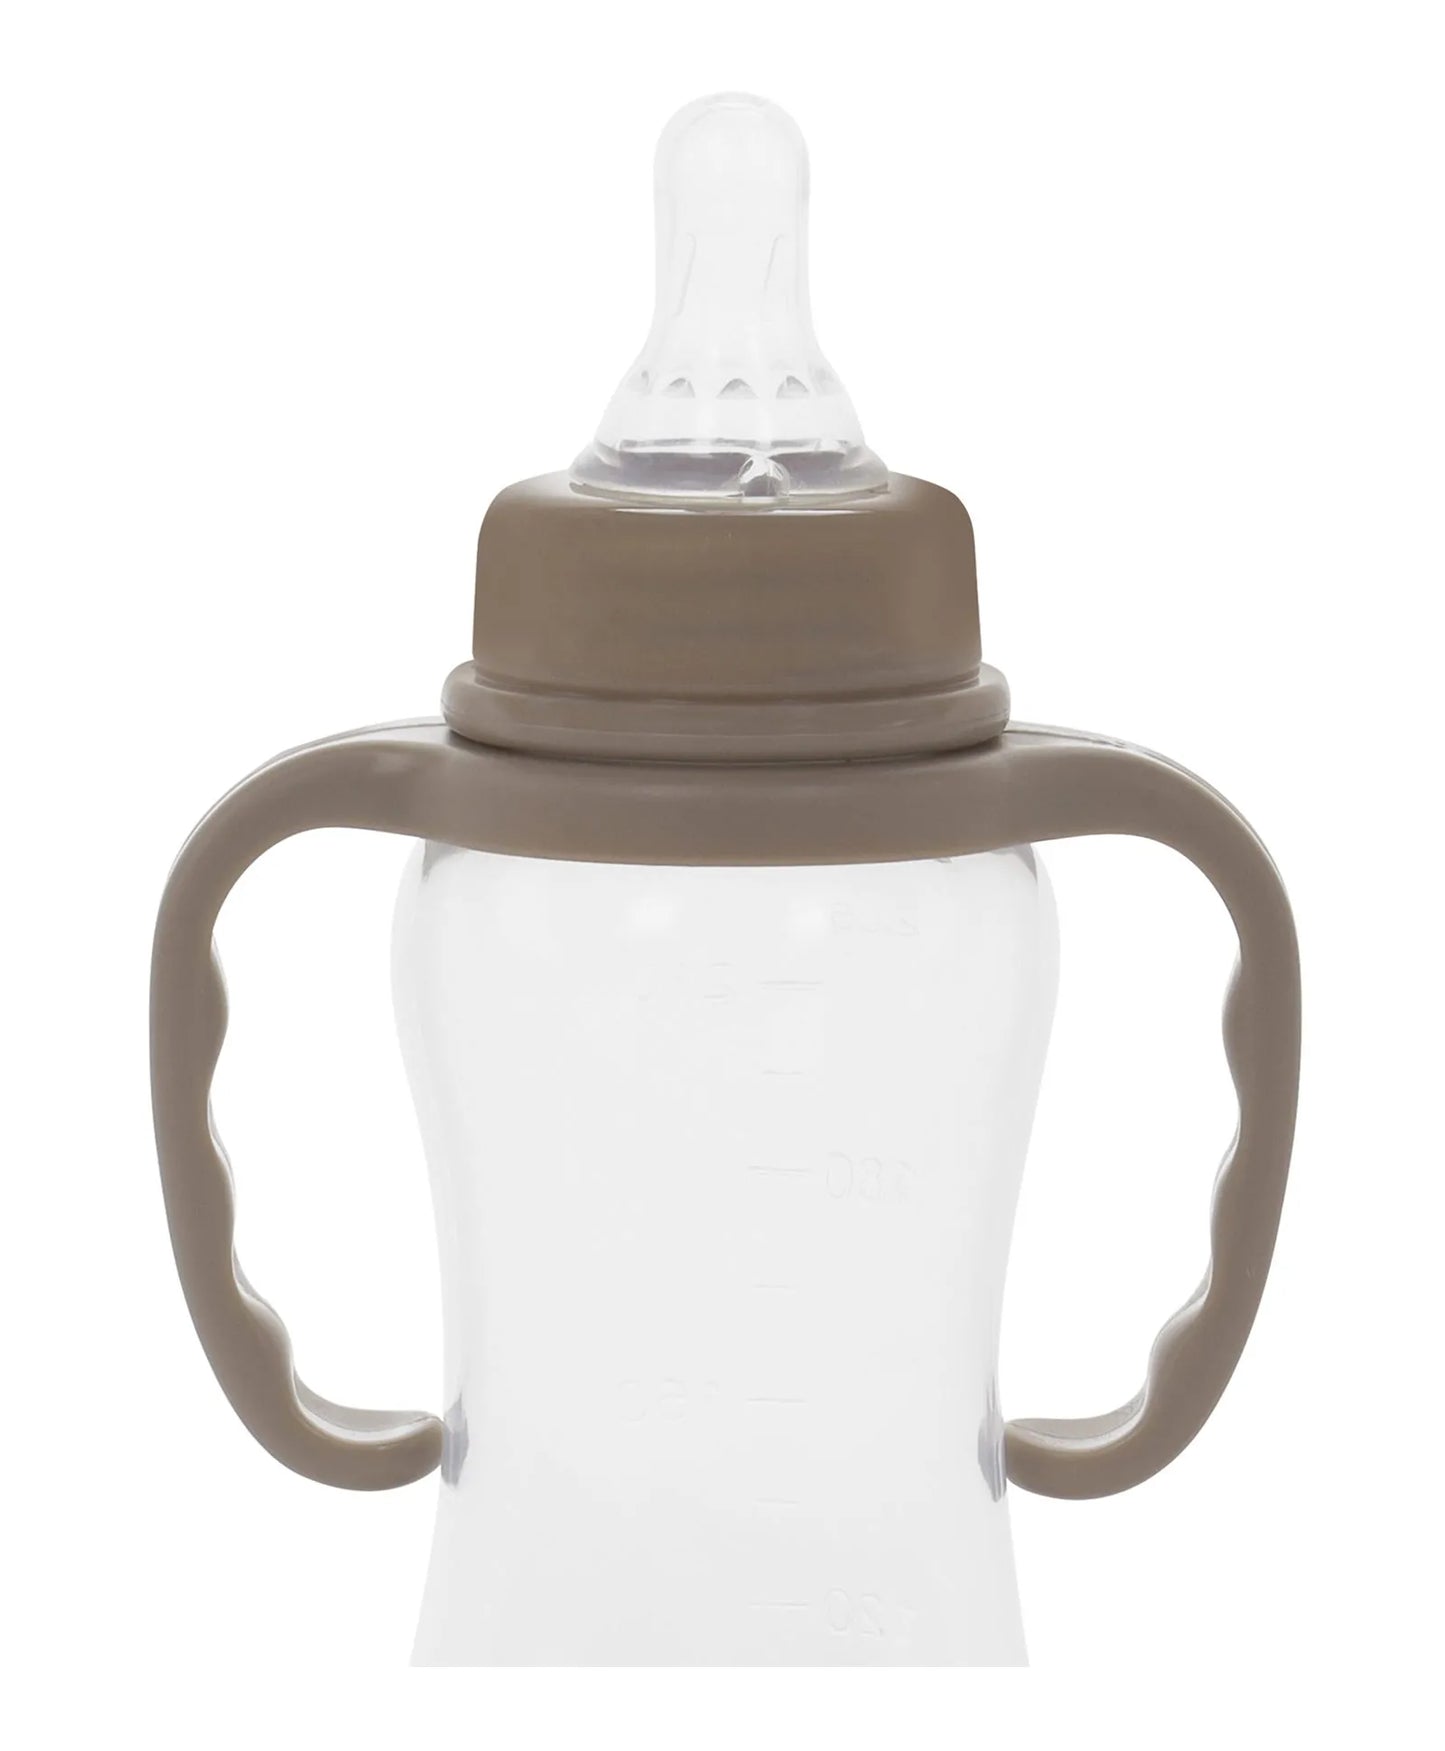 BABY PLUS Baby Feeding Bottle With Innovative Valve Design And Unique Shape 225 ml